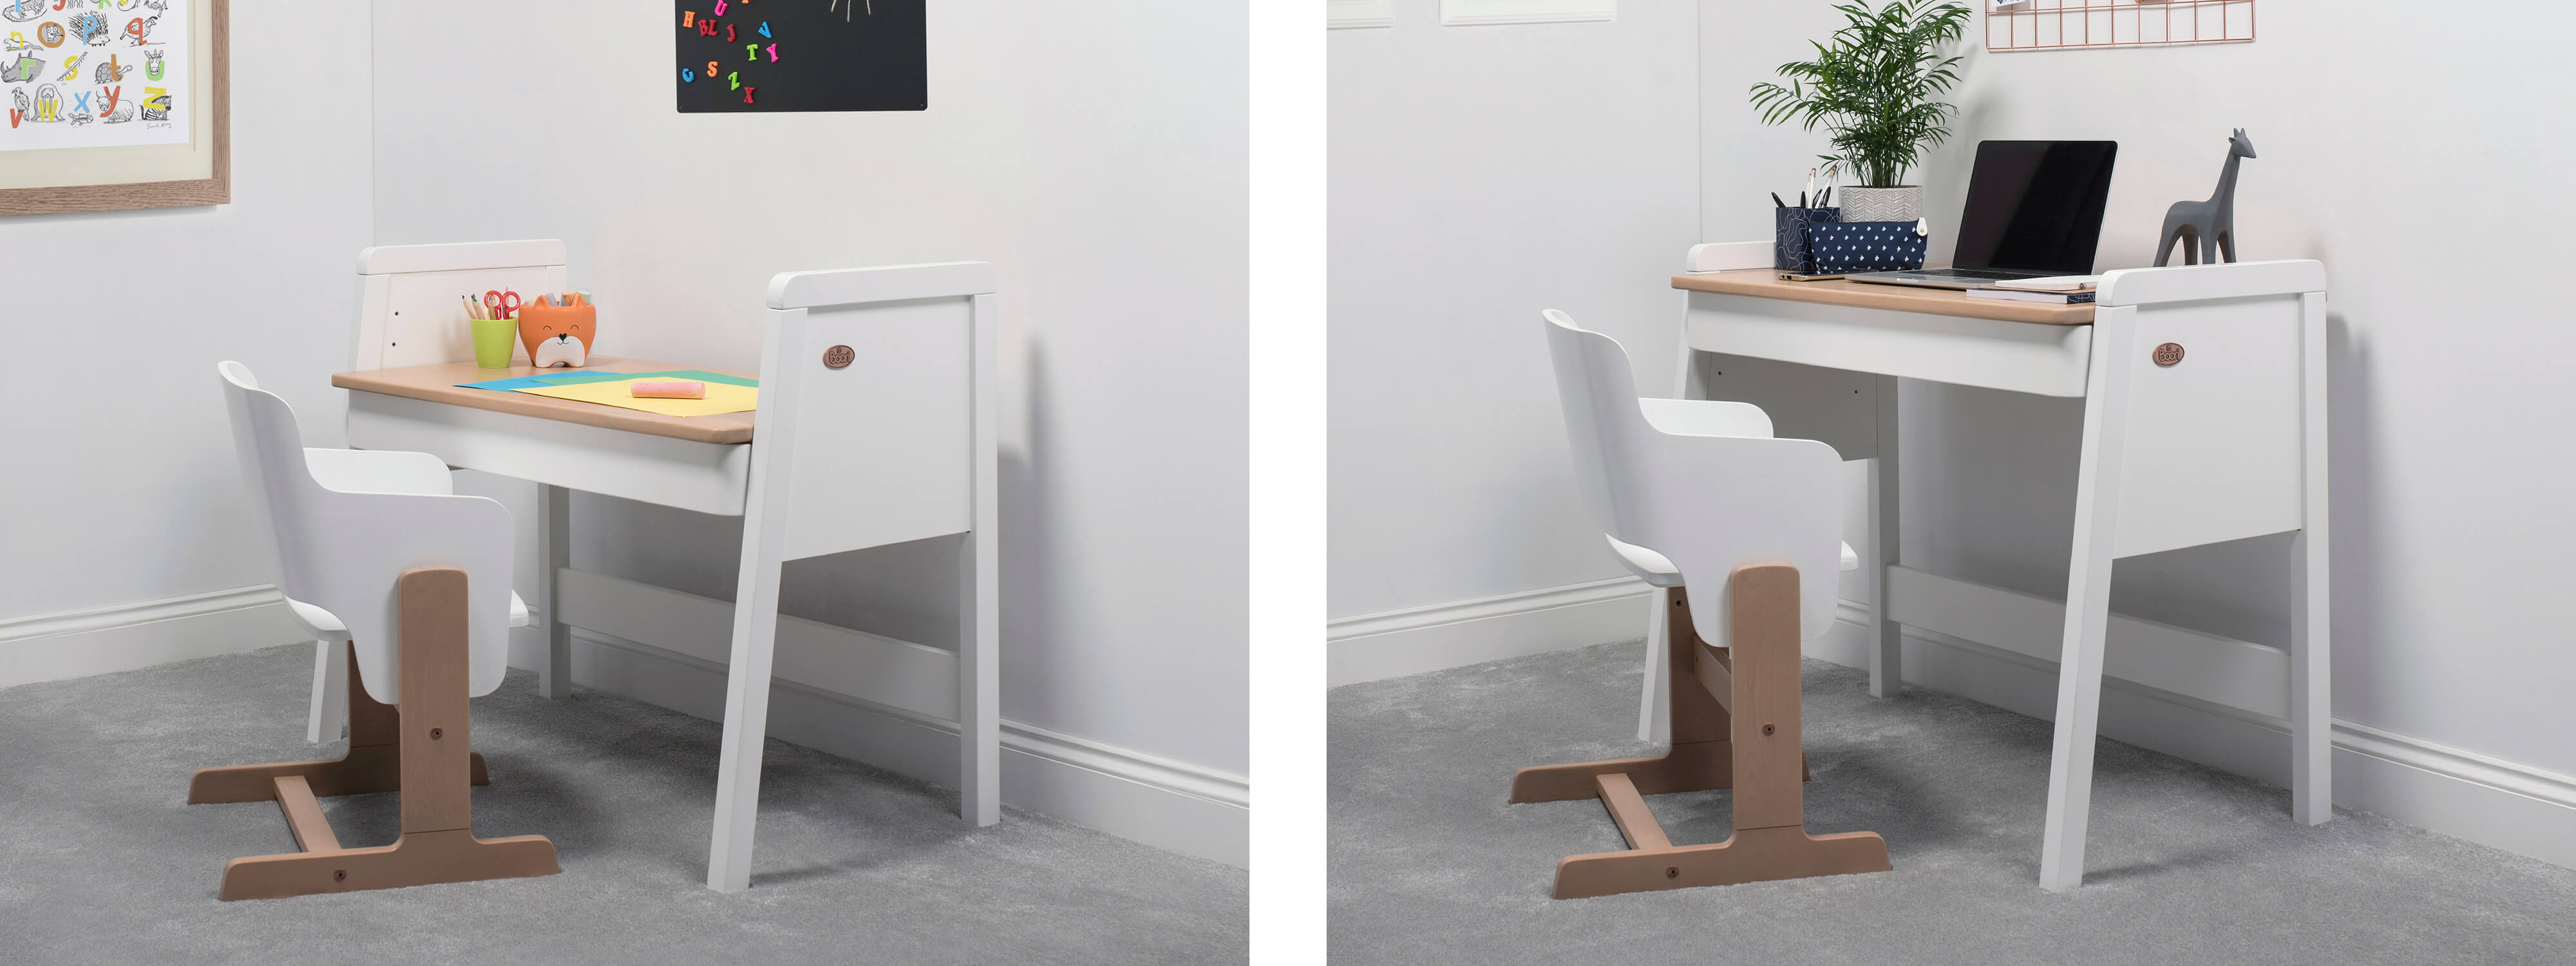 desk that changes height to grow with your child